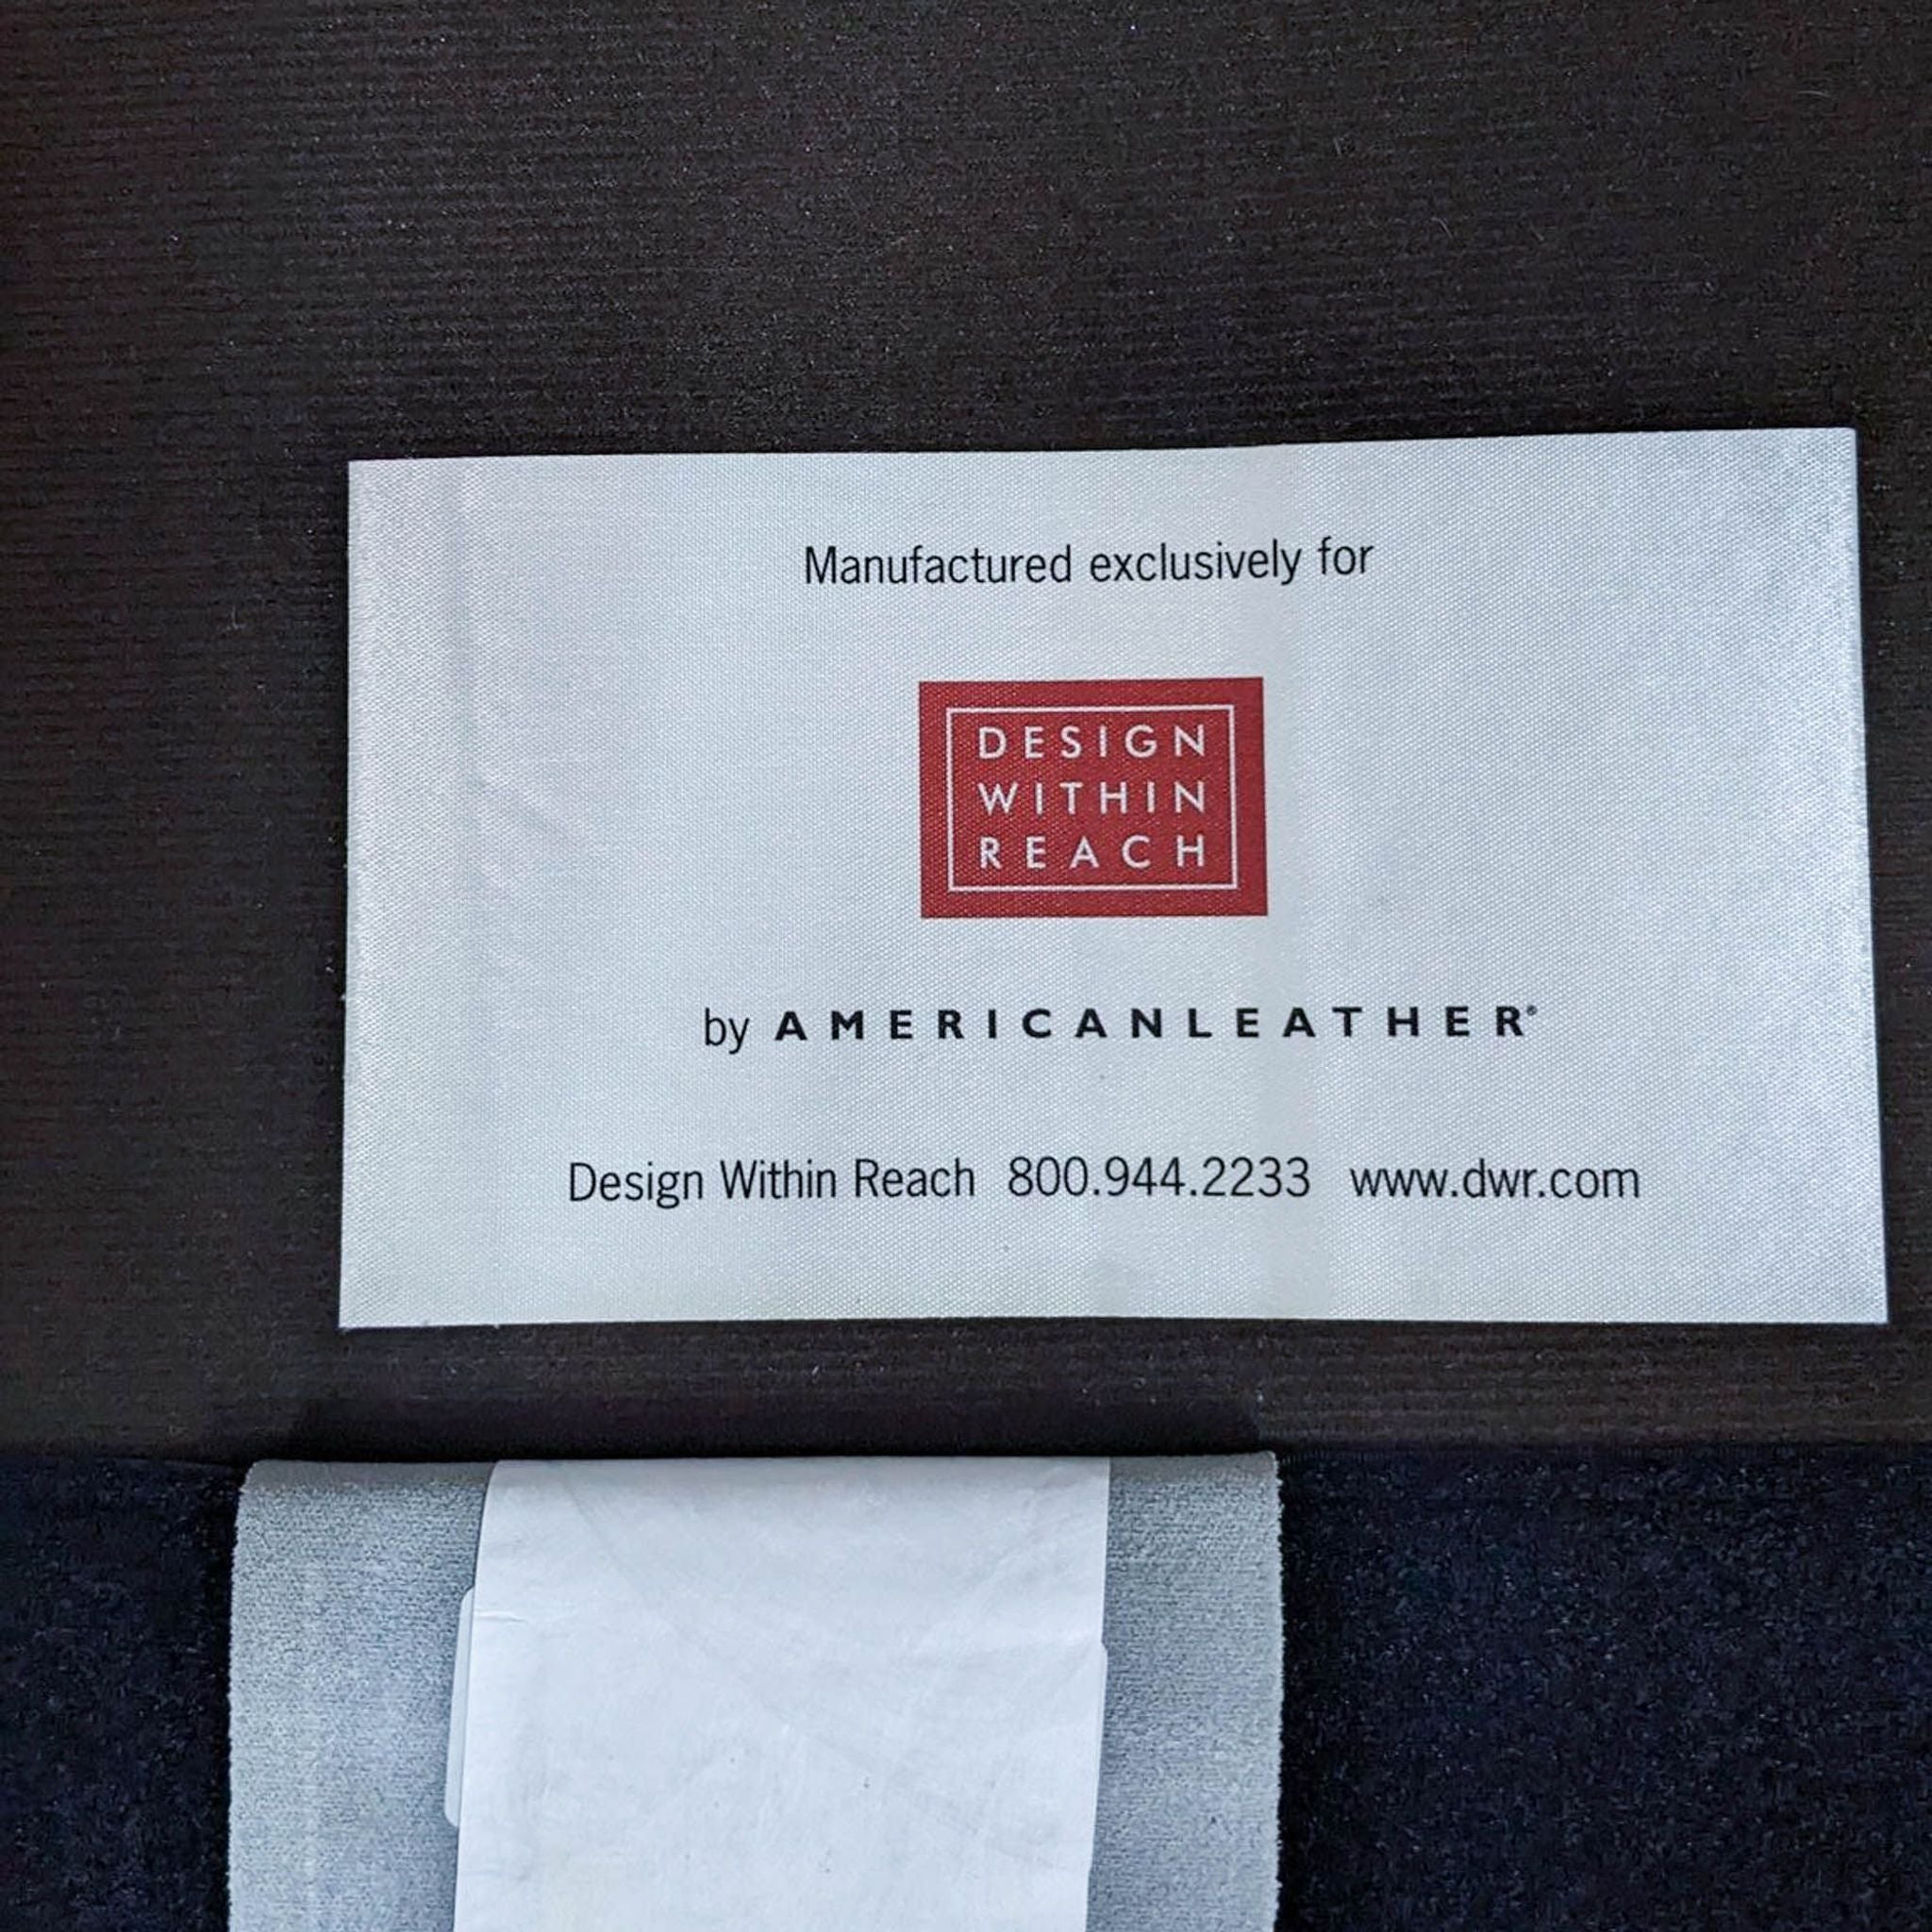 Alt: Design Within Reach label by American Leather on a leather piece, indicating exclusive manufacturing for the brand.